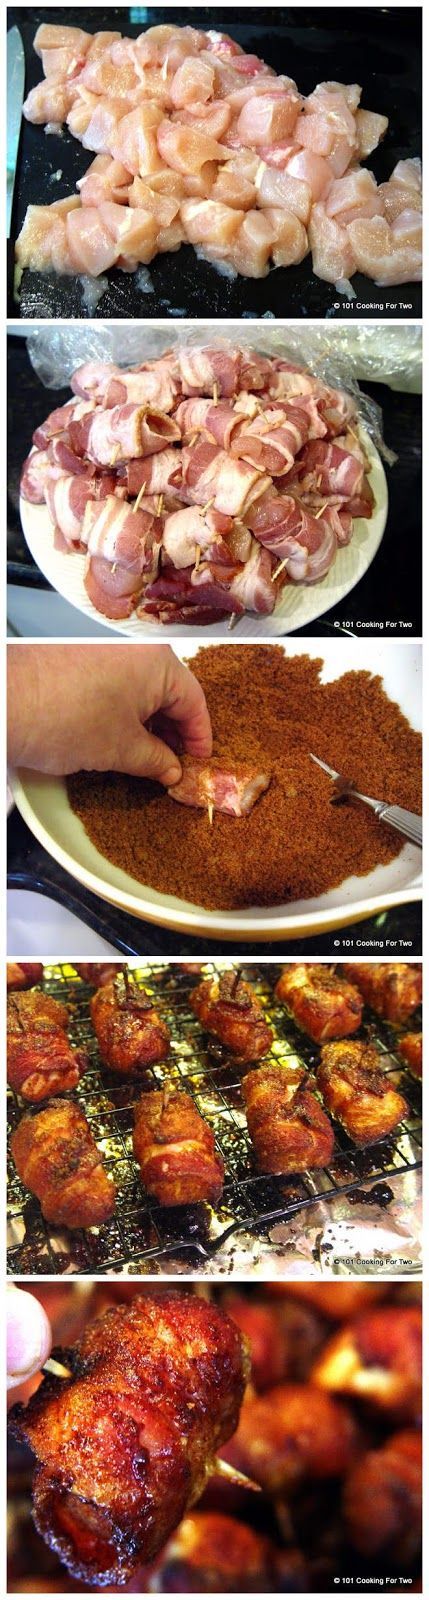 Recipe Best: Sweet and Spicy Chicken Bacon Wraps